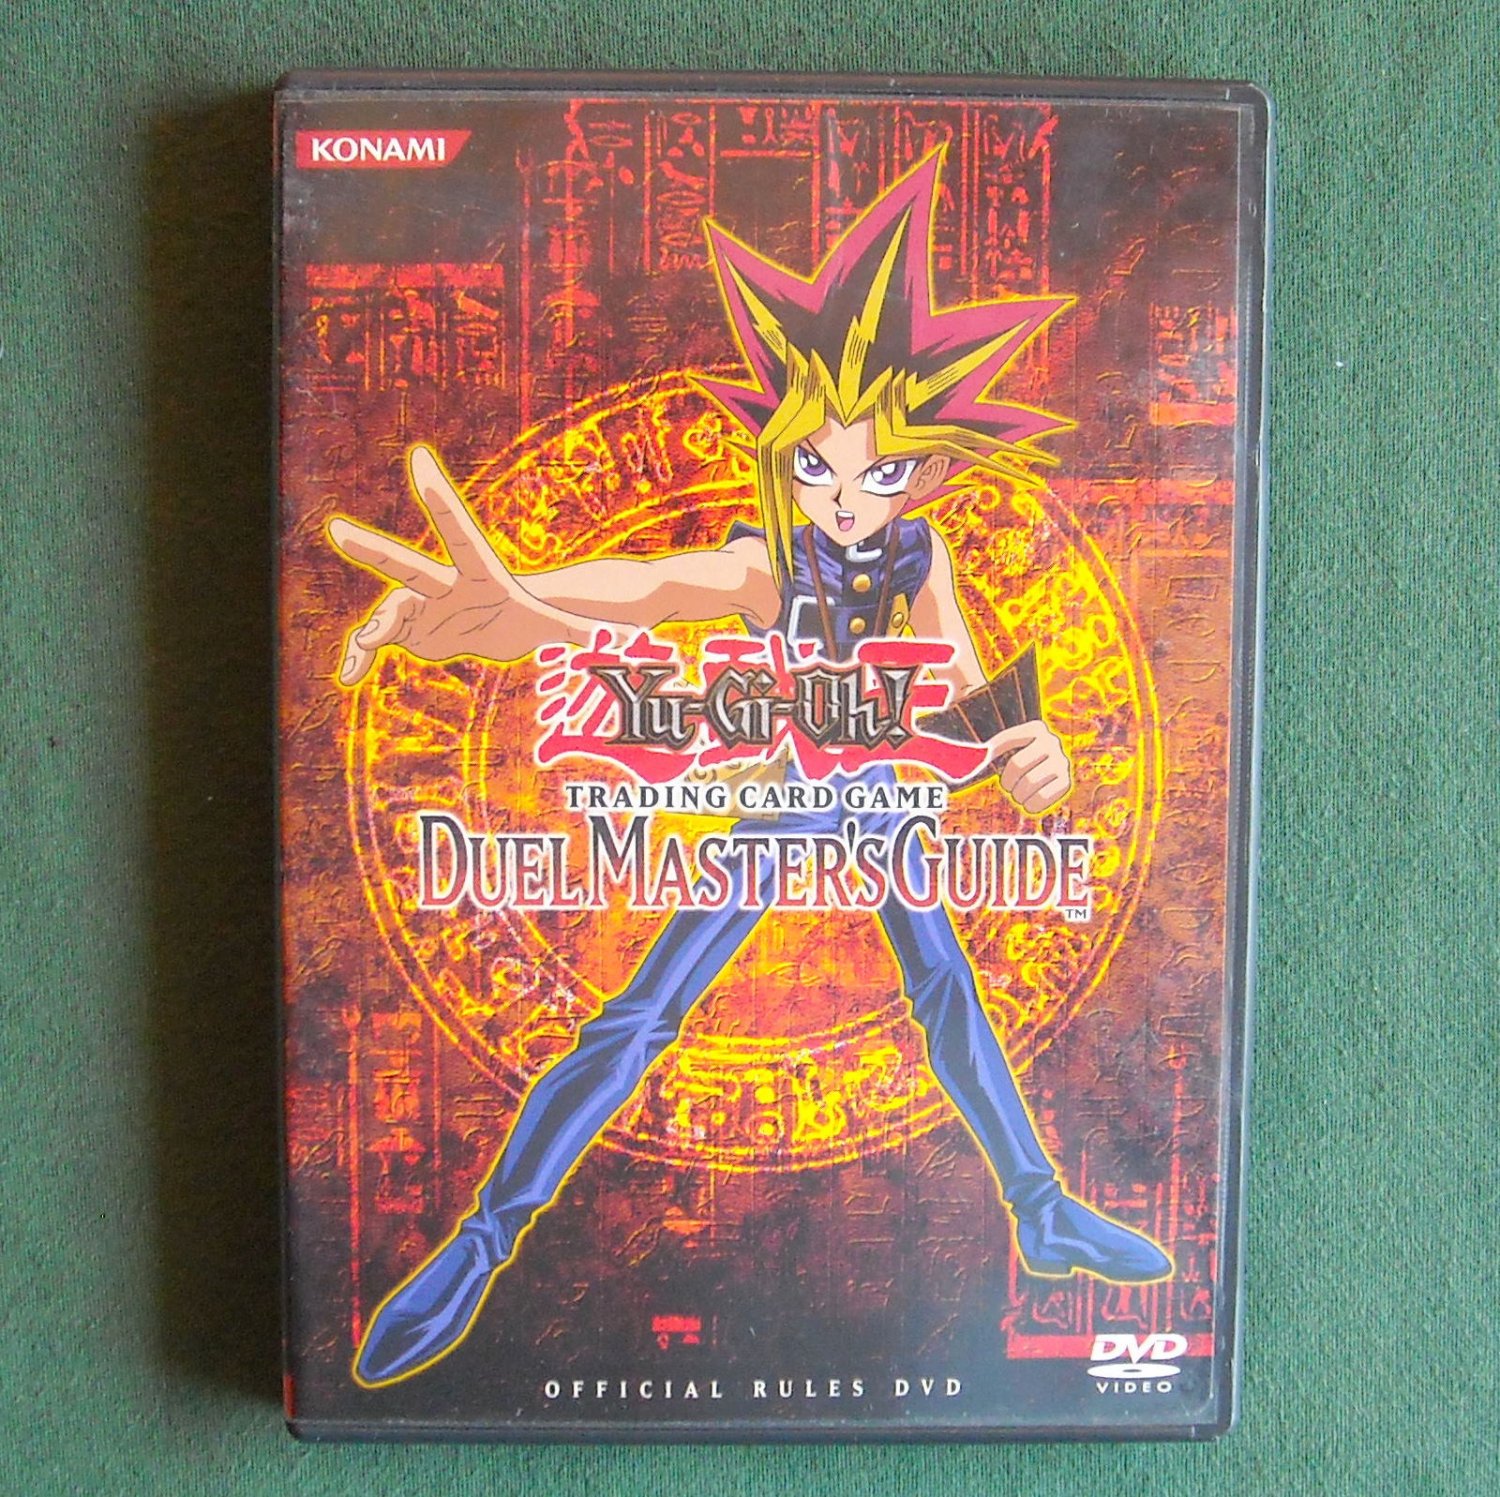 Yu Gi Oh trading card game Duel Masters Guide DVD